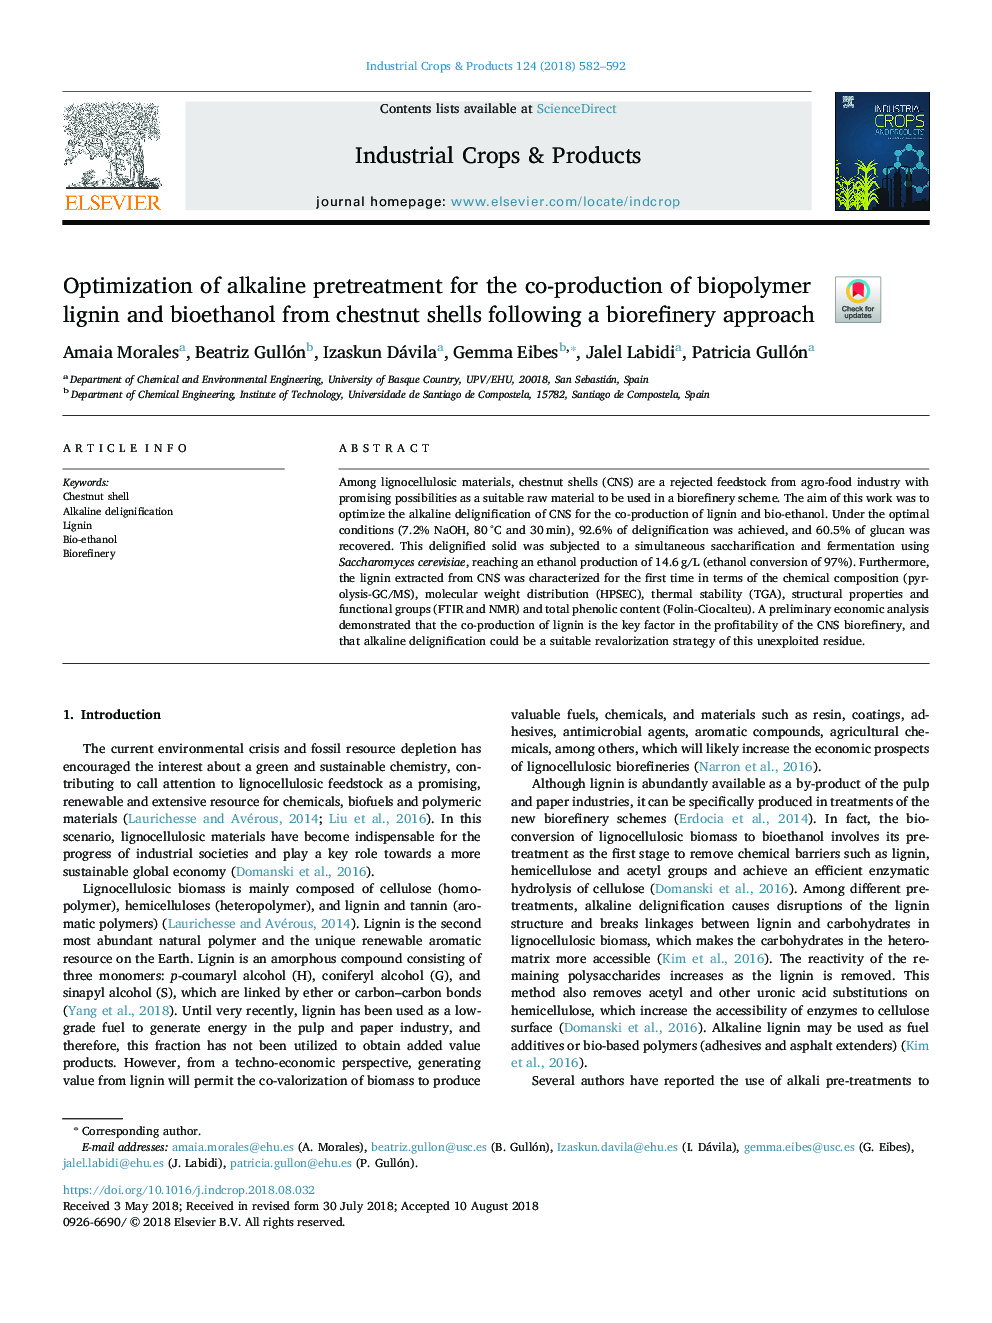 Optimization of alkaline pretreatment for the co-production of biopolymer lignin and bioethanol from chestnut shells following a biorefinery approach